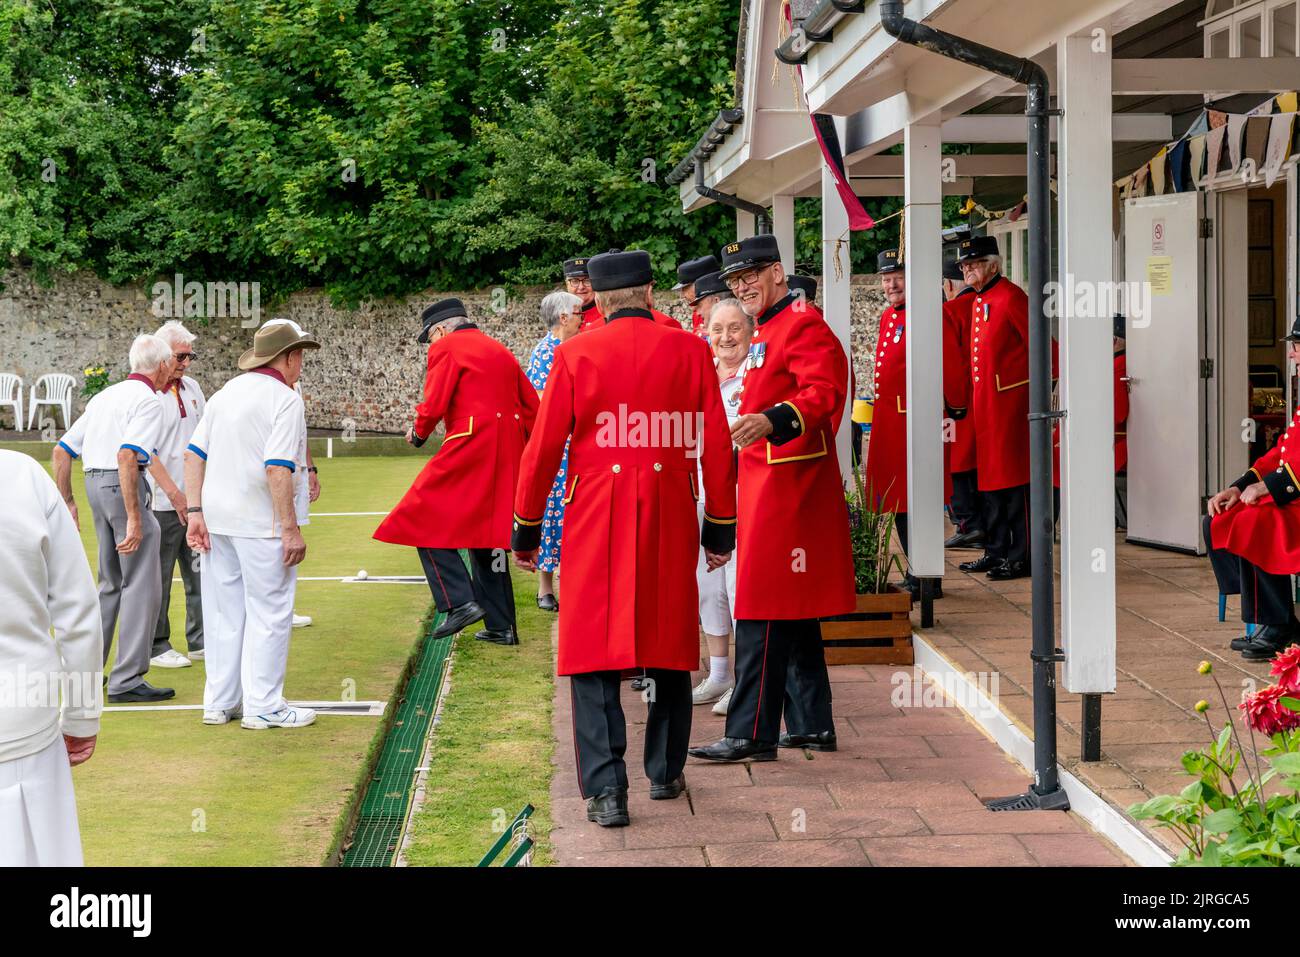 The Chelsea Pensioners Bowls Team Arrive In Lewes To Play The Local Bowls Team, Lewes, East Sussex, UK. Stock Photo